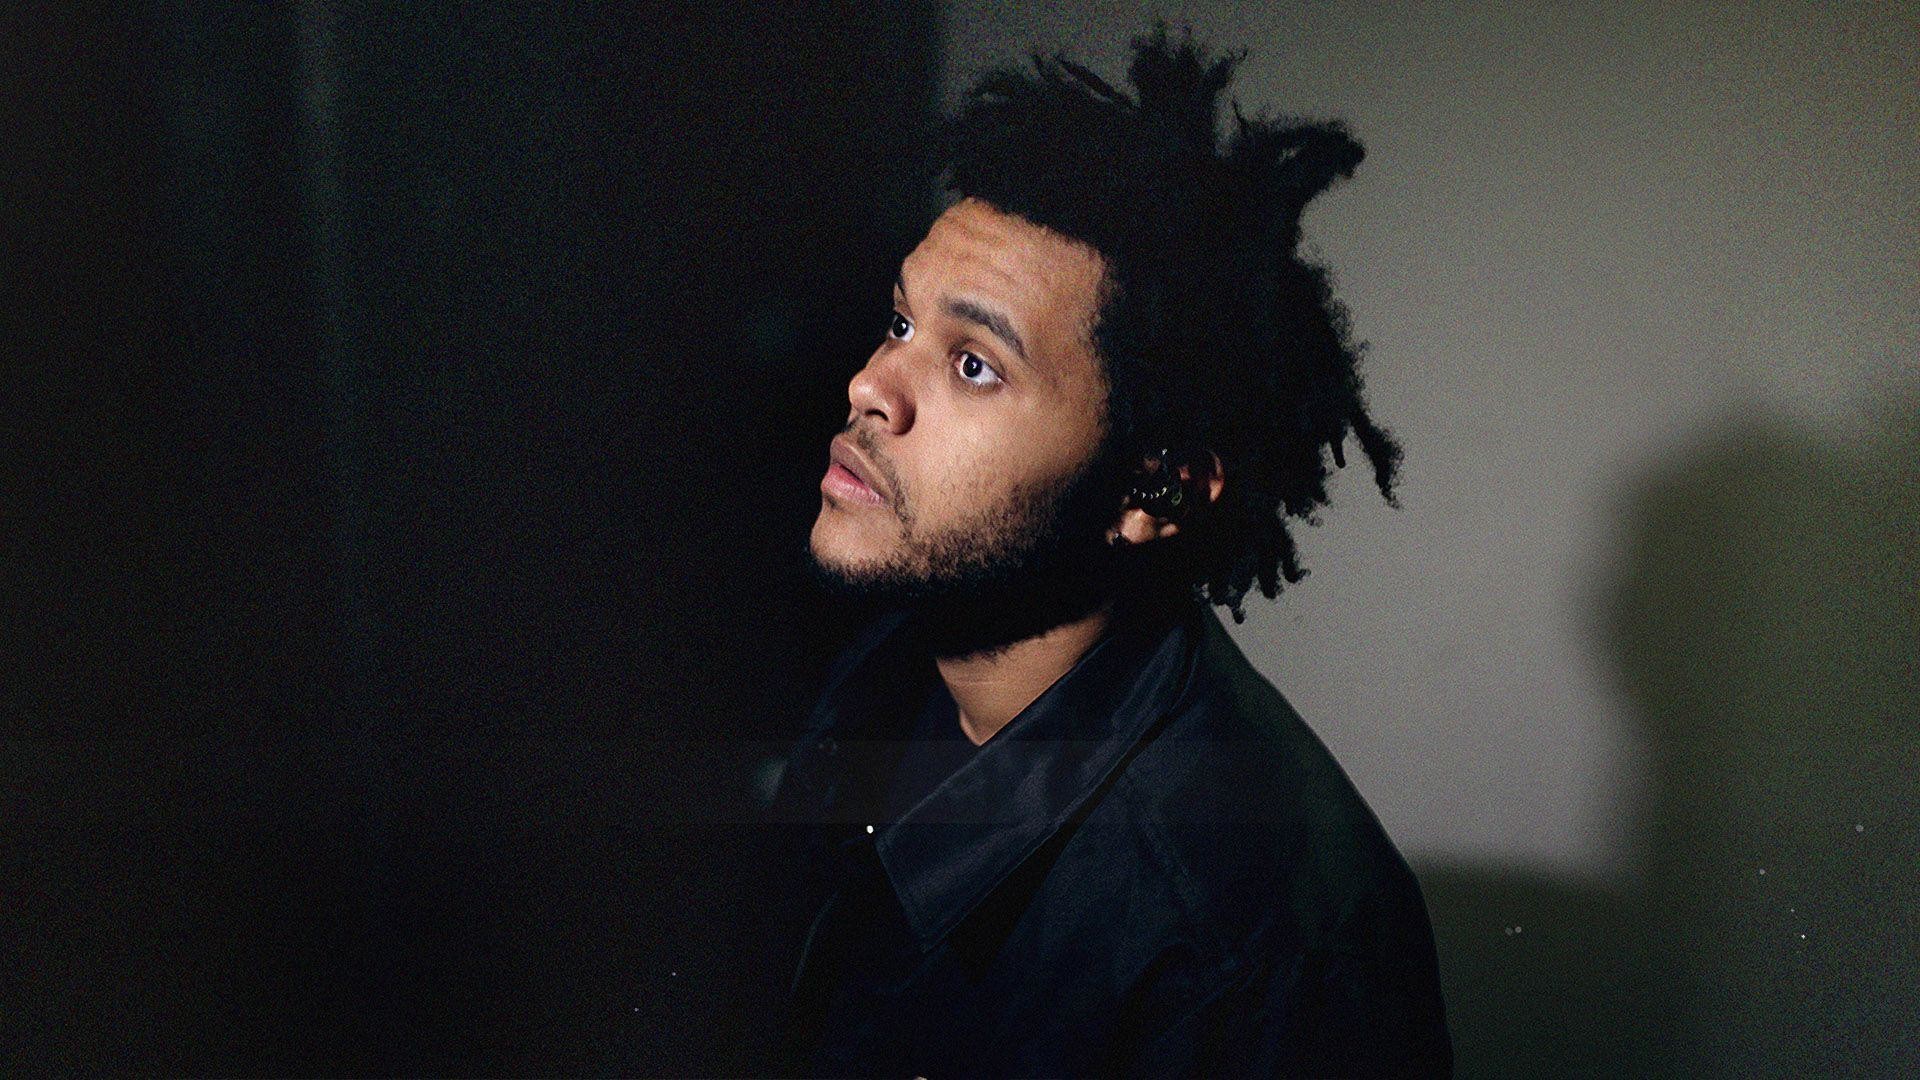 The Weeknd Hd Wallpaper, Live The Weeknd Hd Images - Weeknd High Quality - HD Wallpaper 